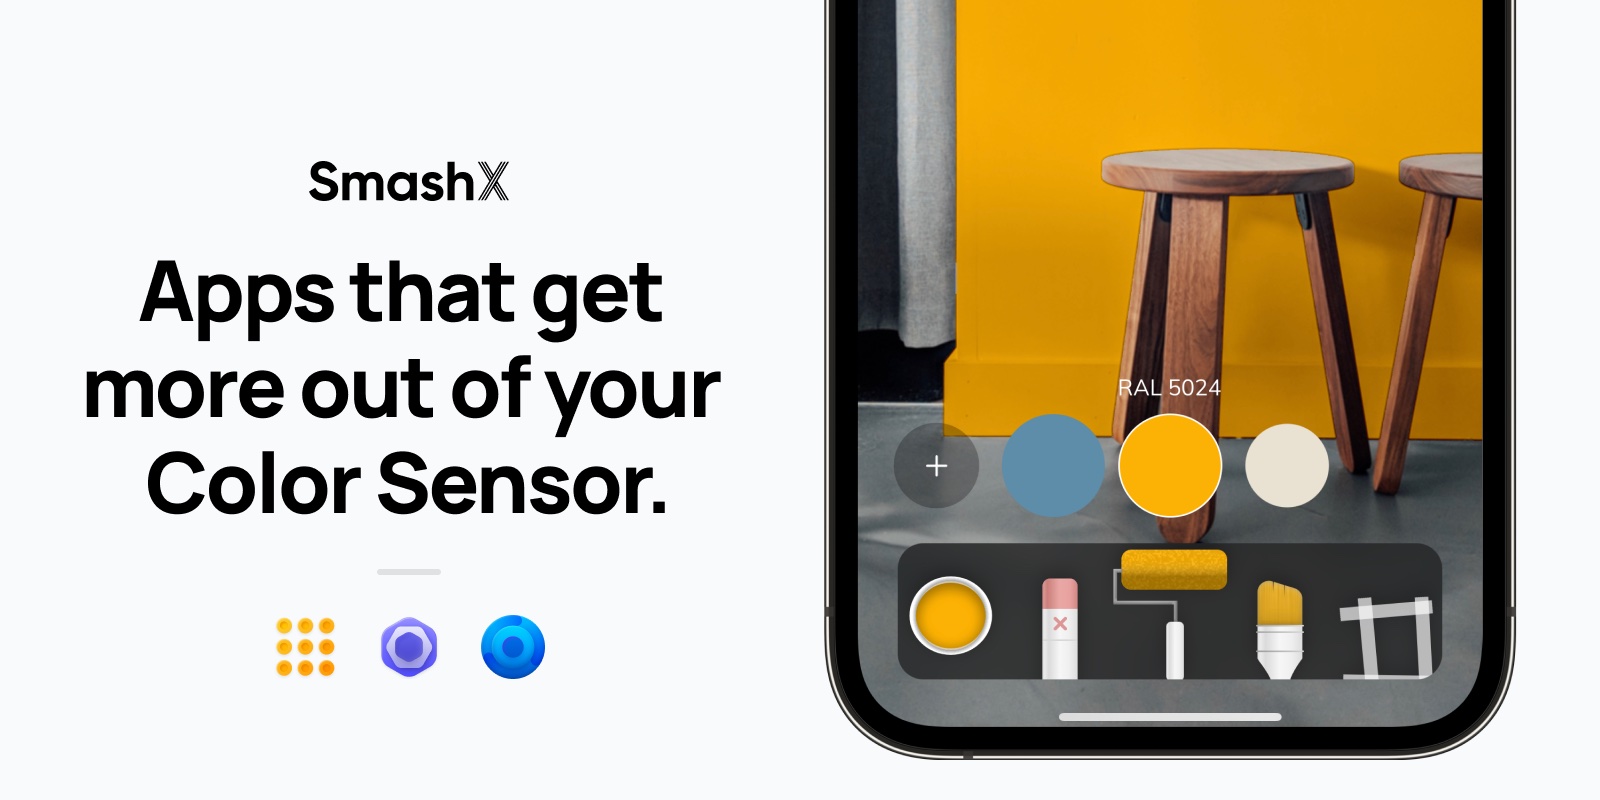 SmashX – Apps that get more out of your Color Sensor